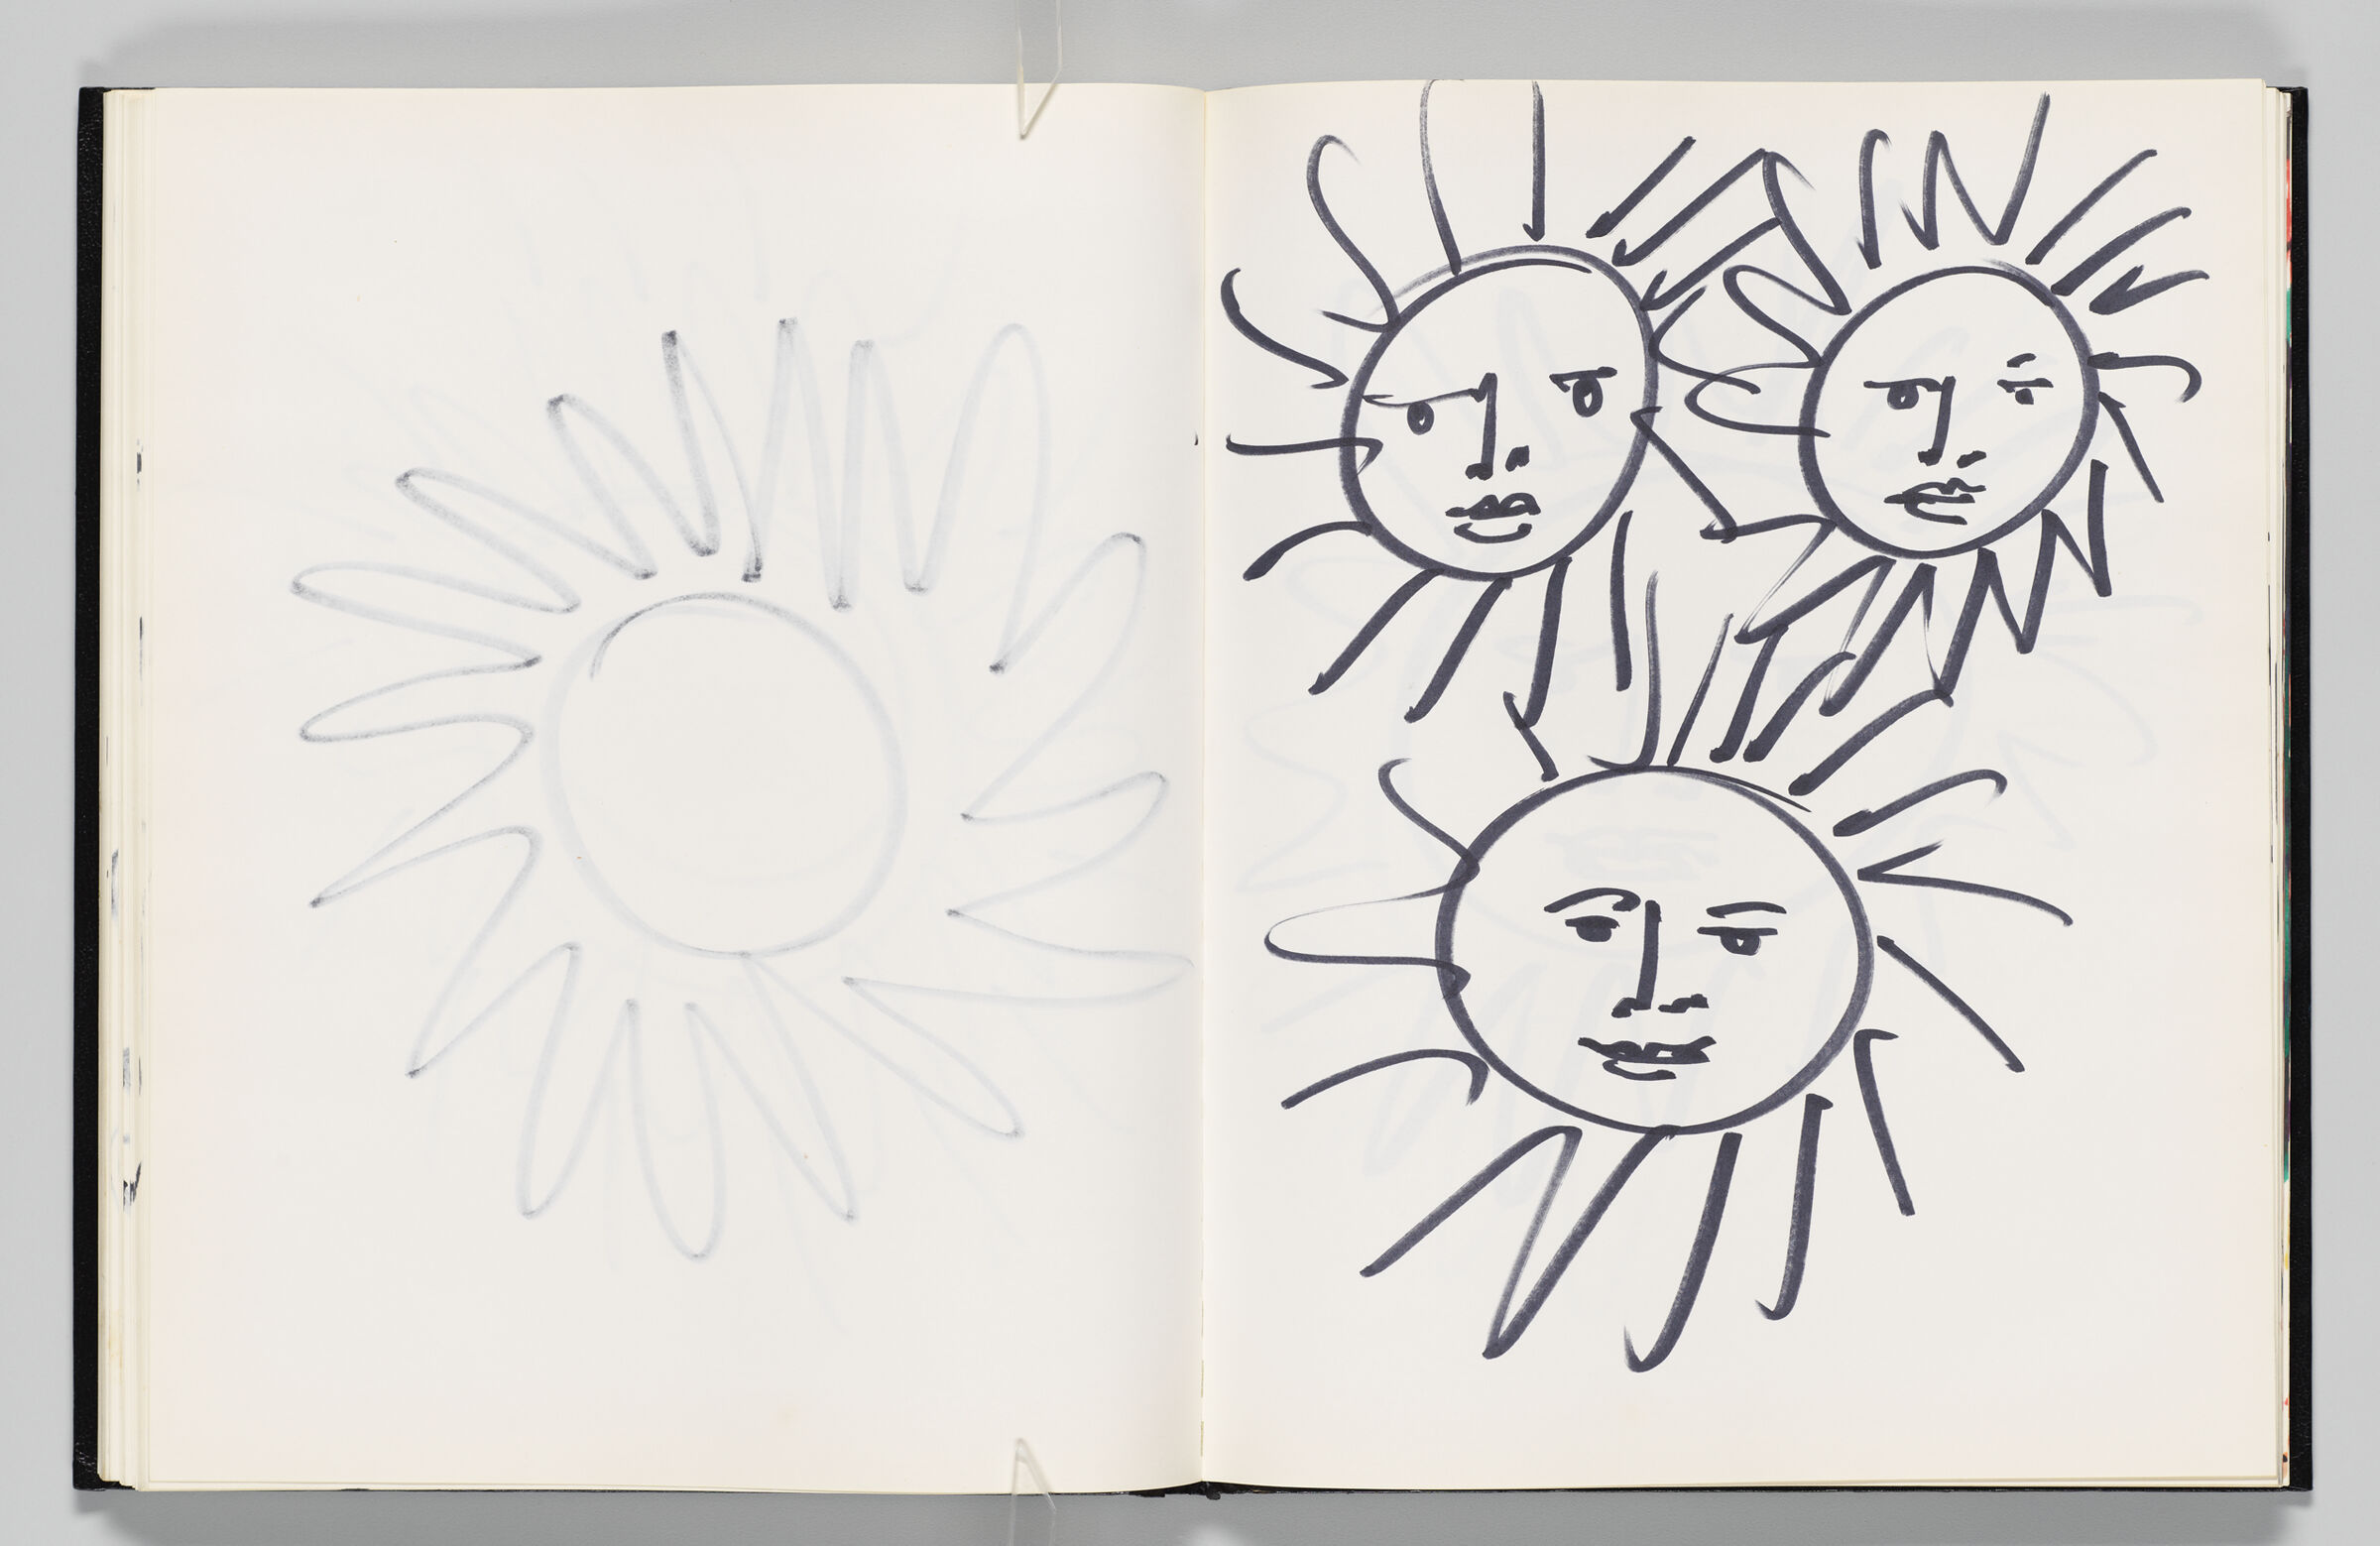 Untitled (Bleed-Through Of Previous Page, Left Page); Untitled (Suns/Phaetons, Right Page)